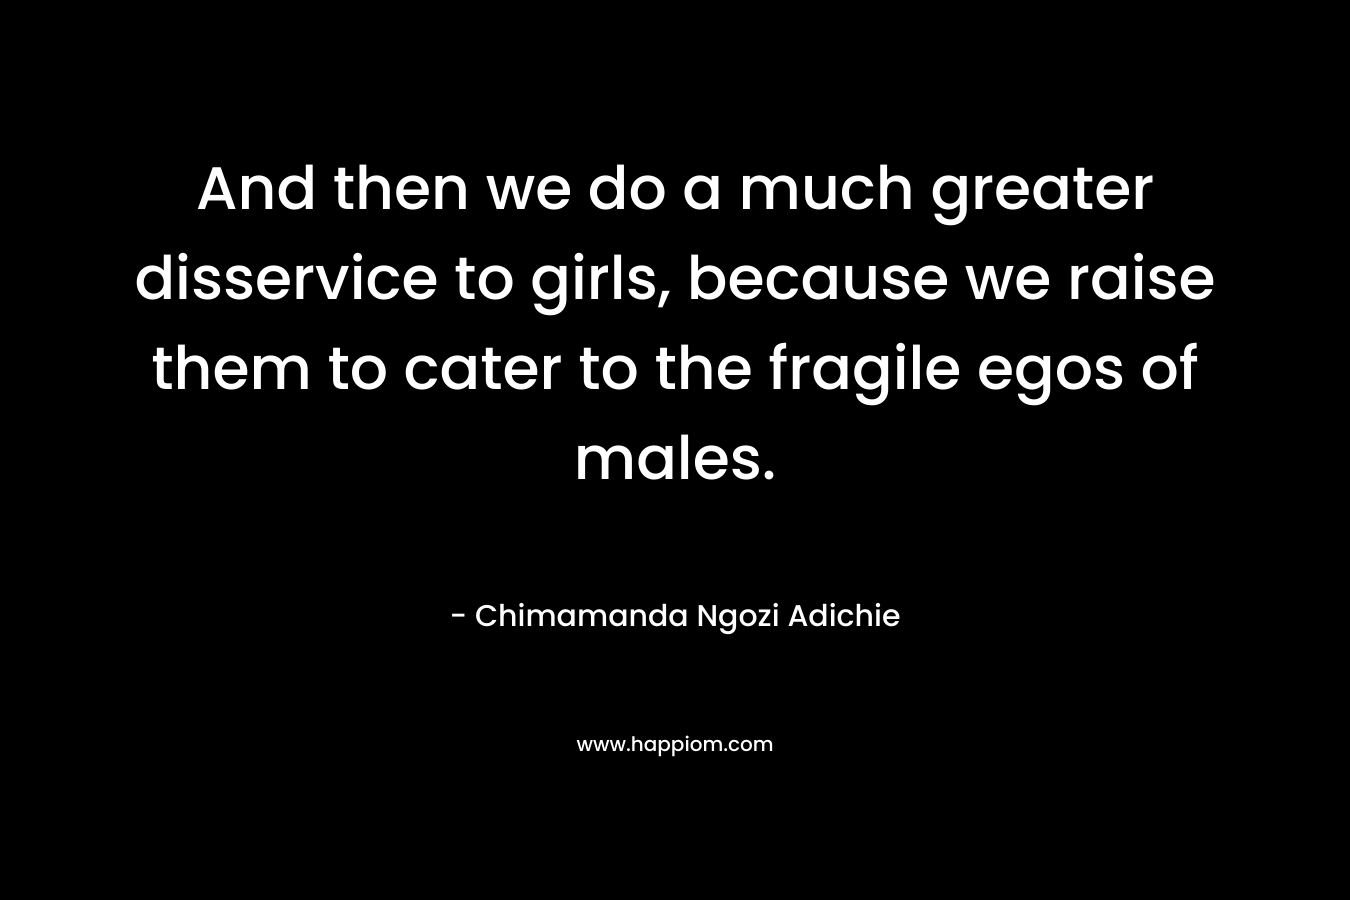 And then we do a much greater disservice to girls, because we raise them to cater to the fragile egos of males.